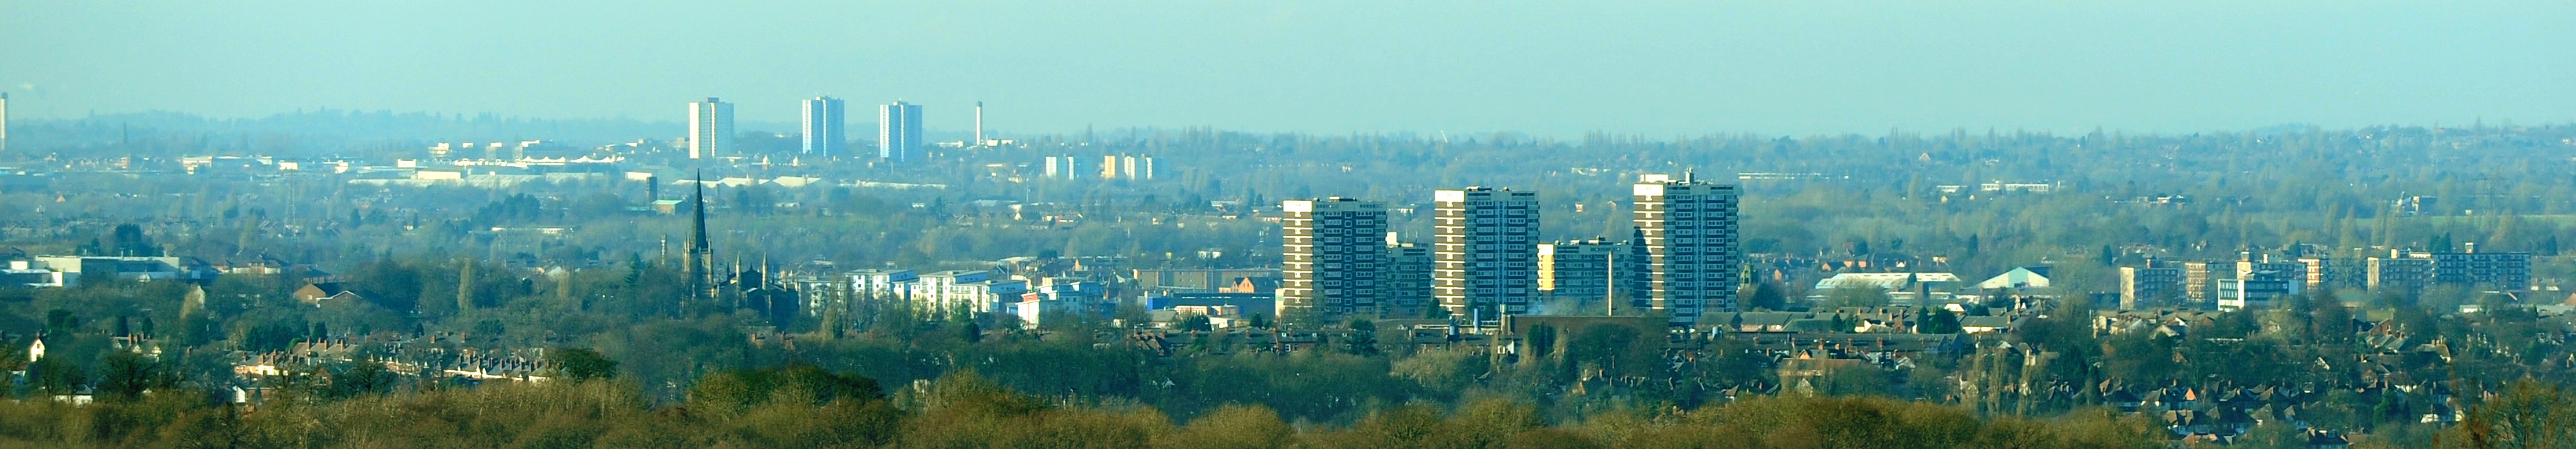 Landscape Photo of Walsall town